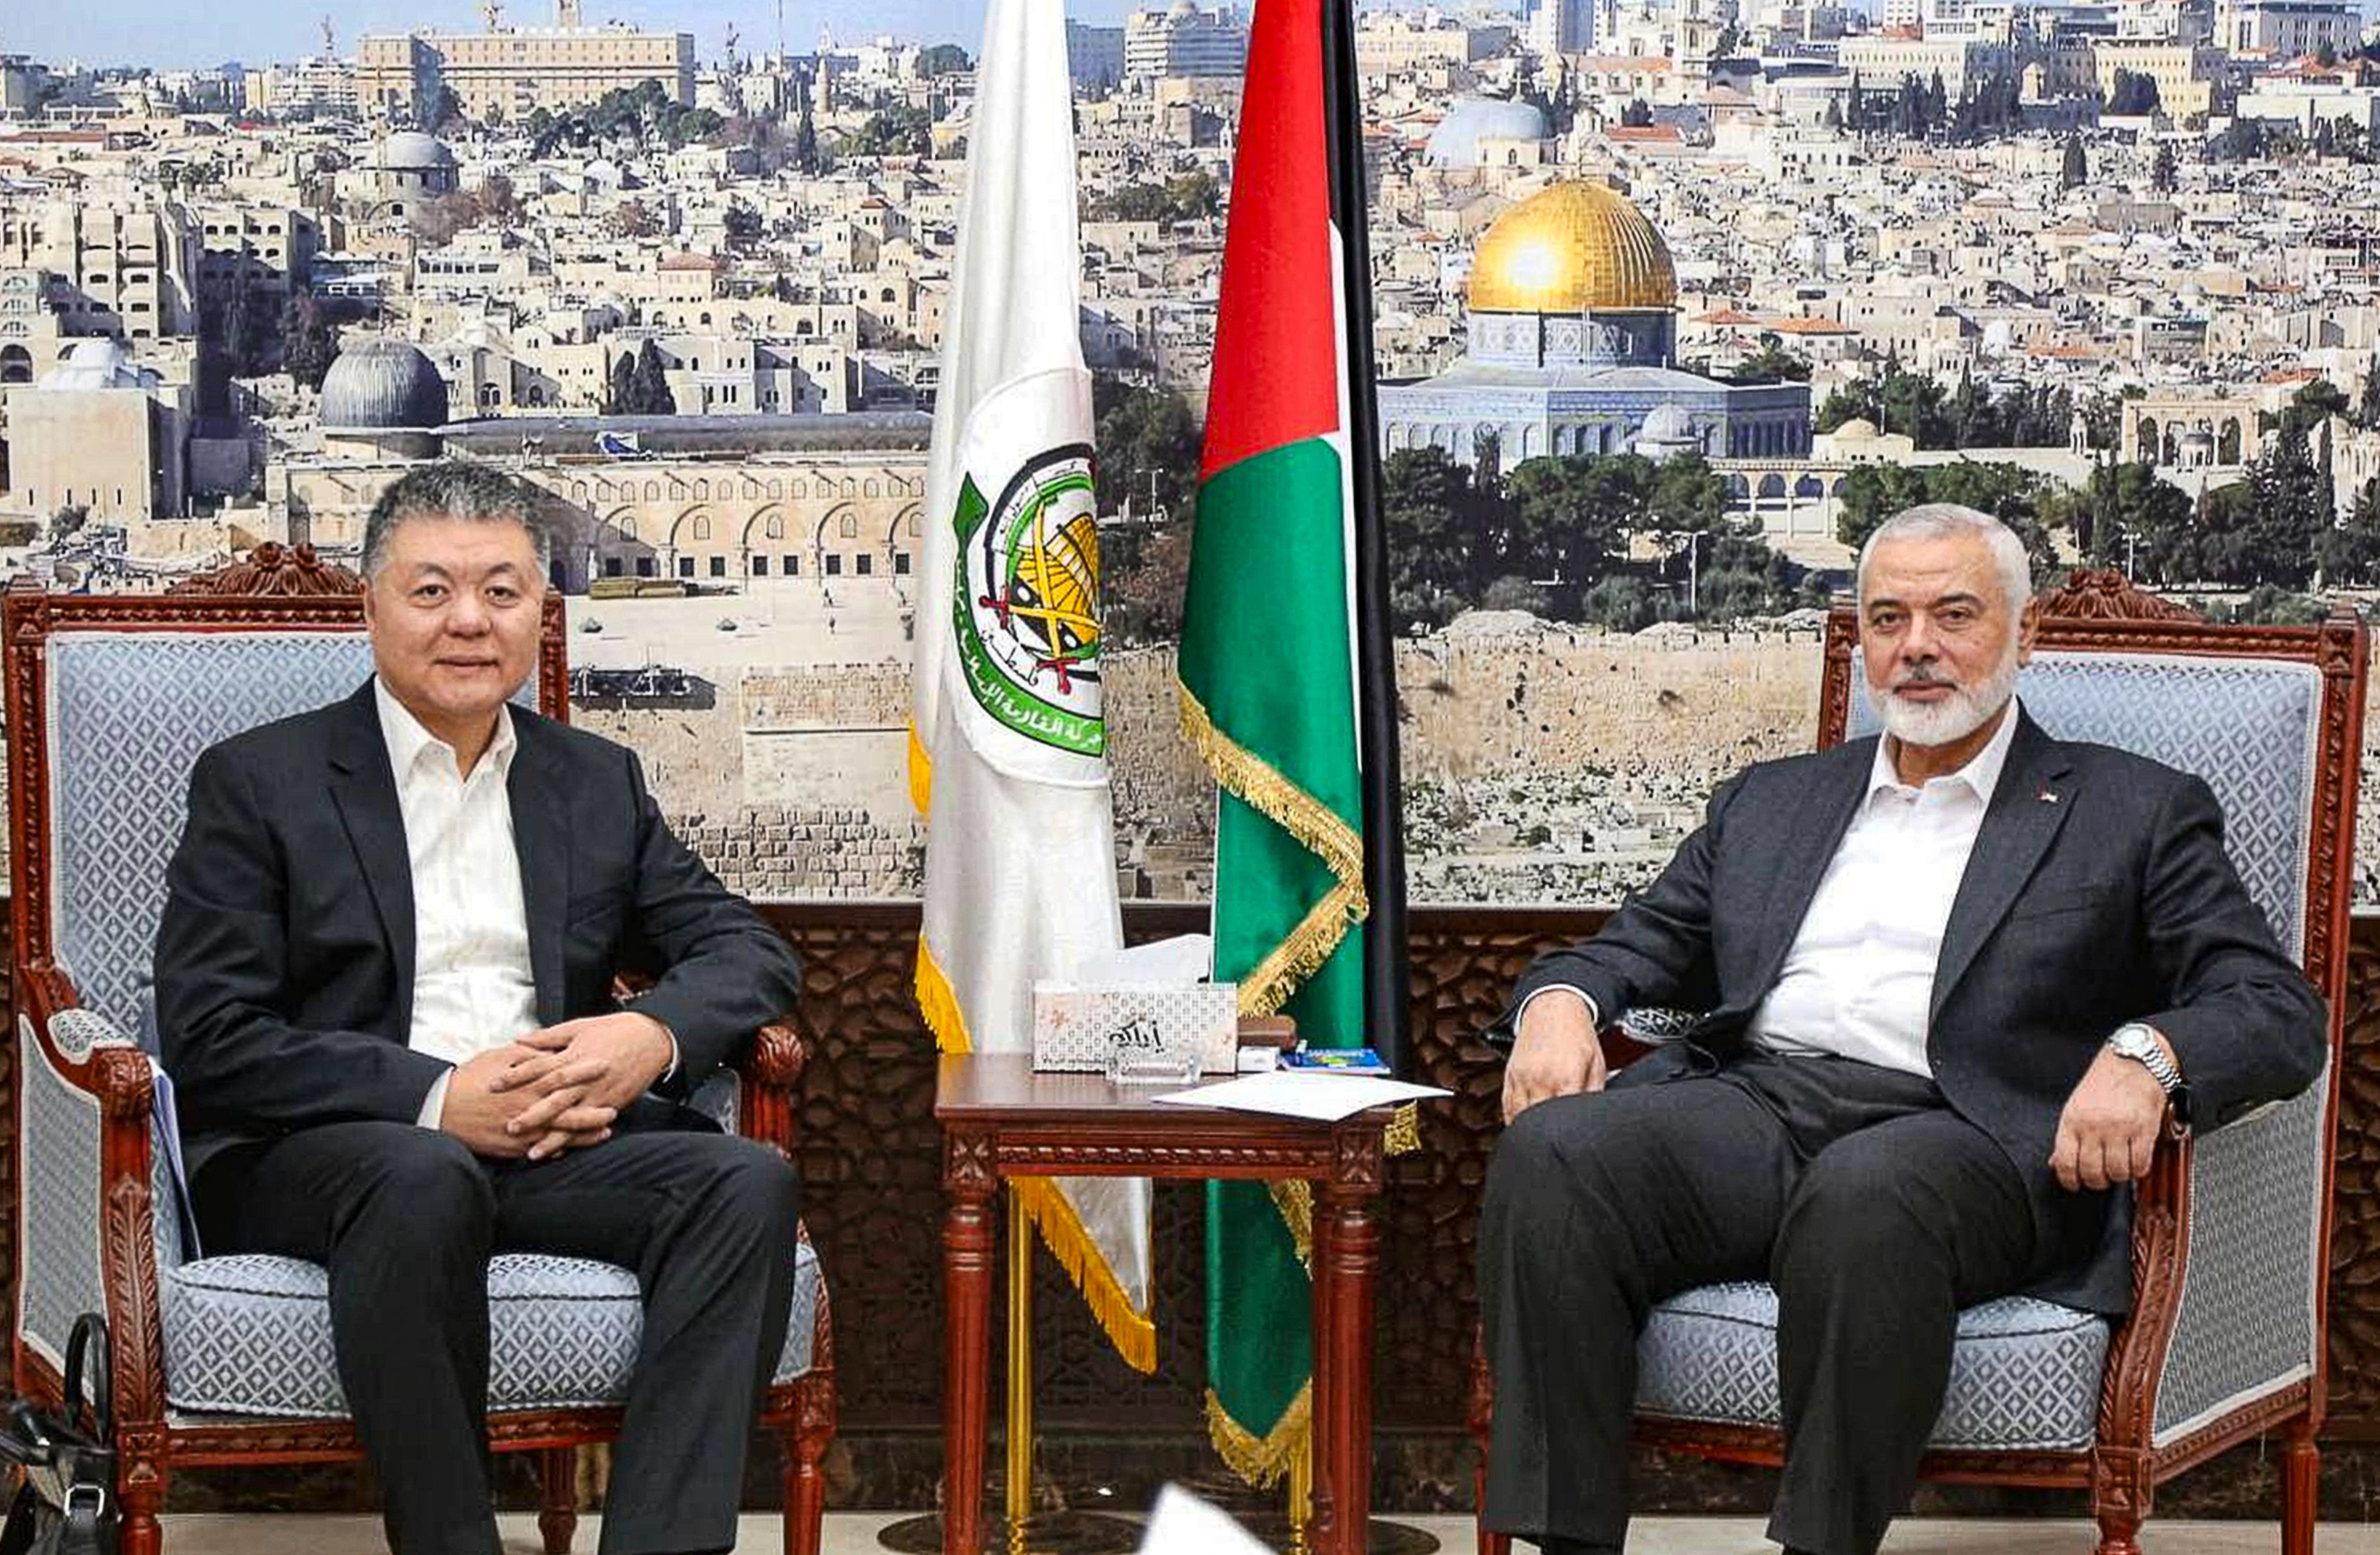 Hamas leader Ismail Haniyeh meets Wang Kejian, an envoy of the Chinese Foreign Ministry, in Qatar on Sunday afternoon to discuss the war in Gaza. Photo: X/@soupalestina